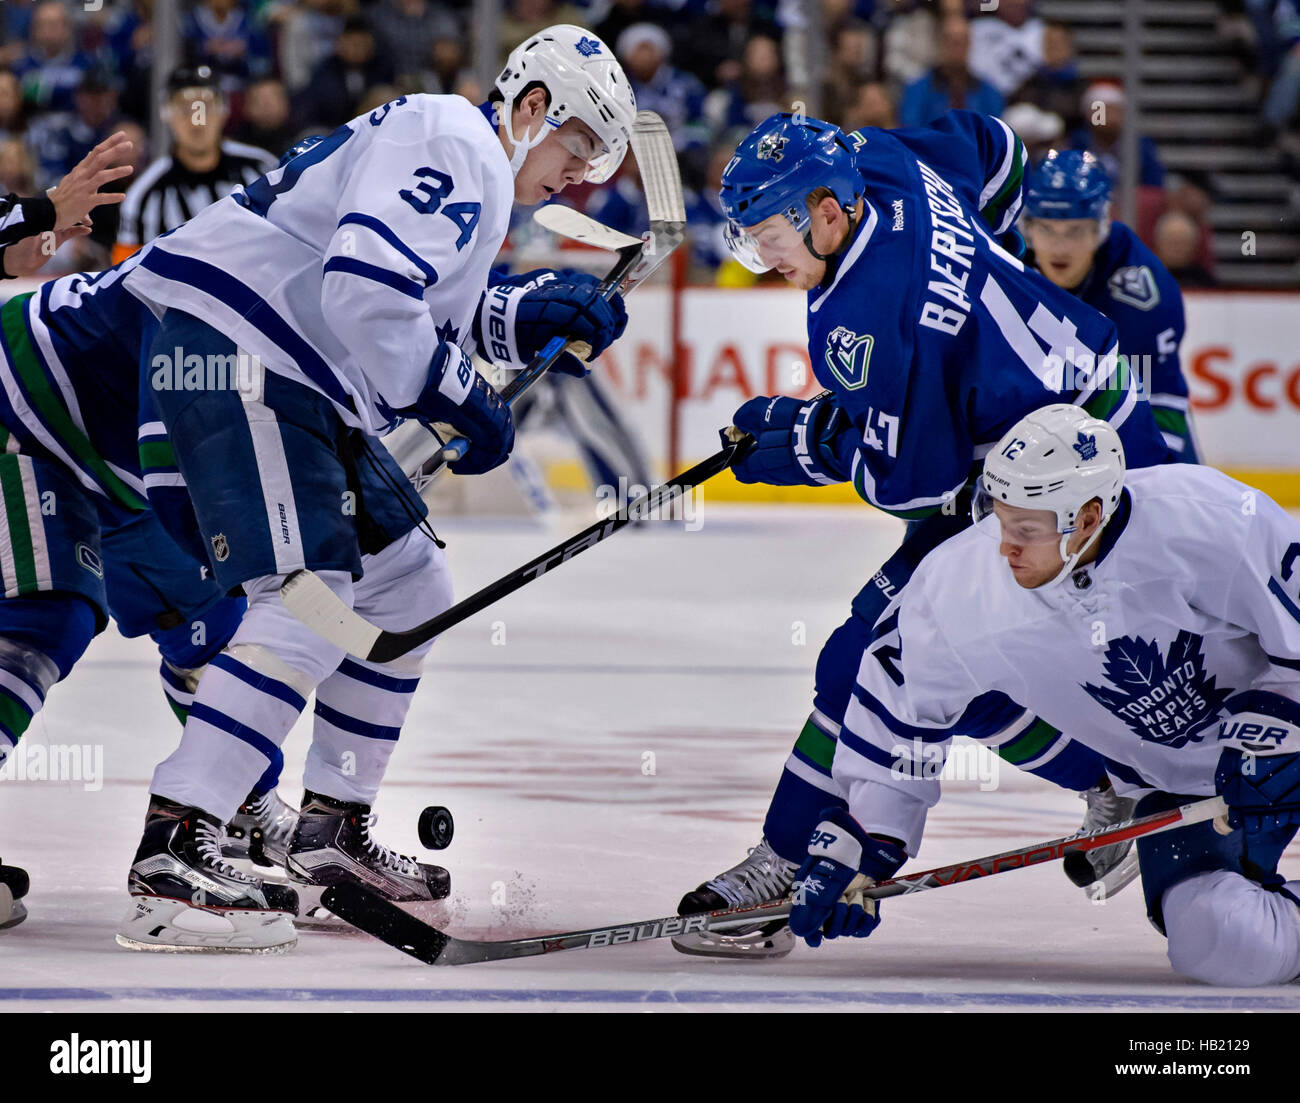 Toronto maple leafs stadium hi-res stock photography and images - Alamy